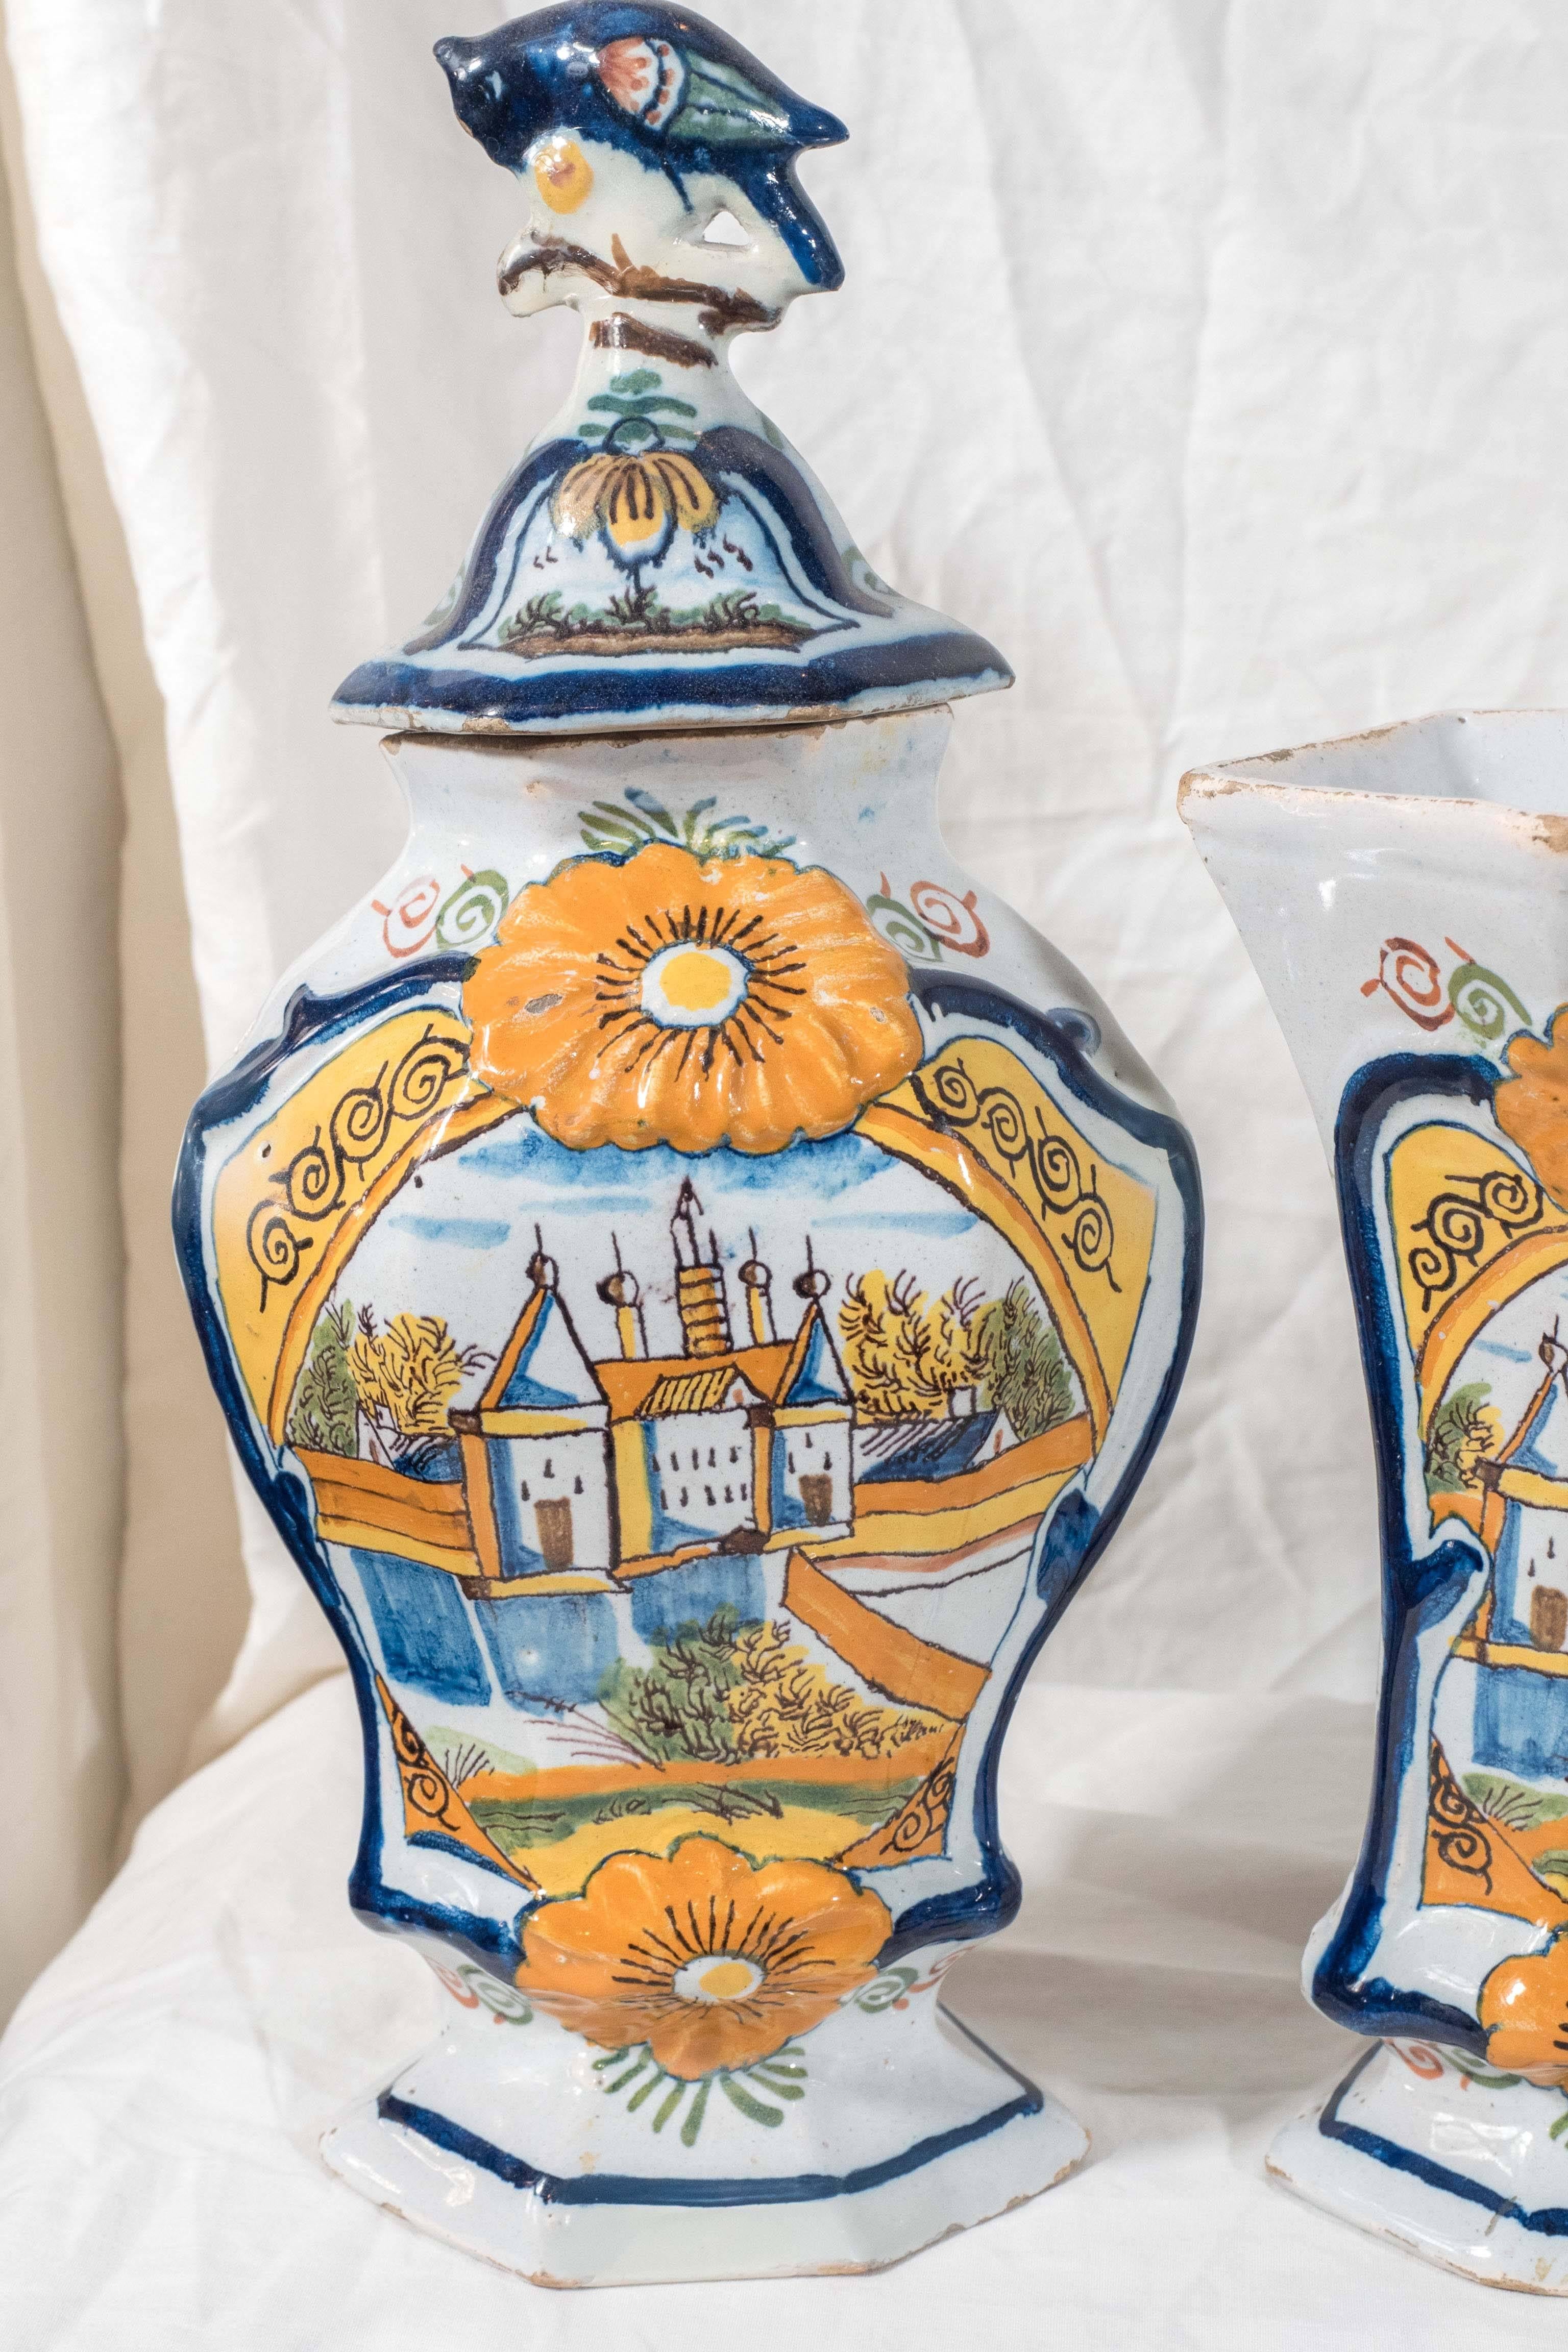 A garniture of five Dutch Delft mantle vases made in the last quarter of the 18th century.  Each vase shows a castle painted polychrome colors of bright orange, yellow, with soft greens. The image is framed by two very large sunflowers and a cobalt